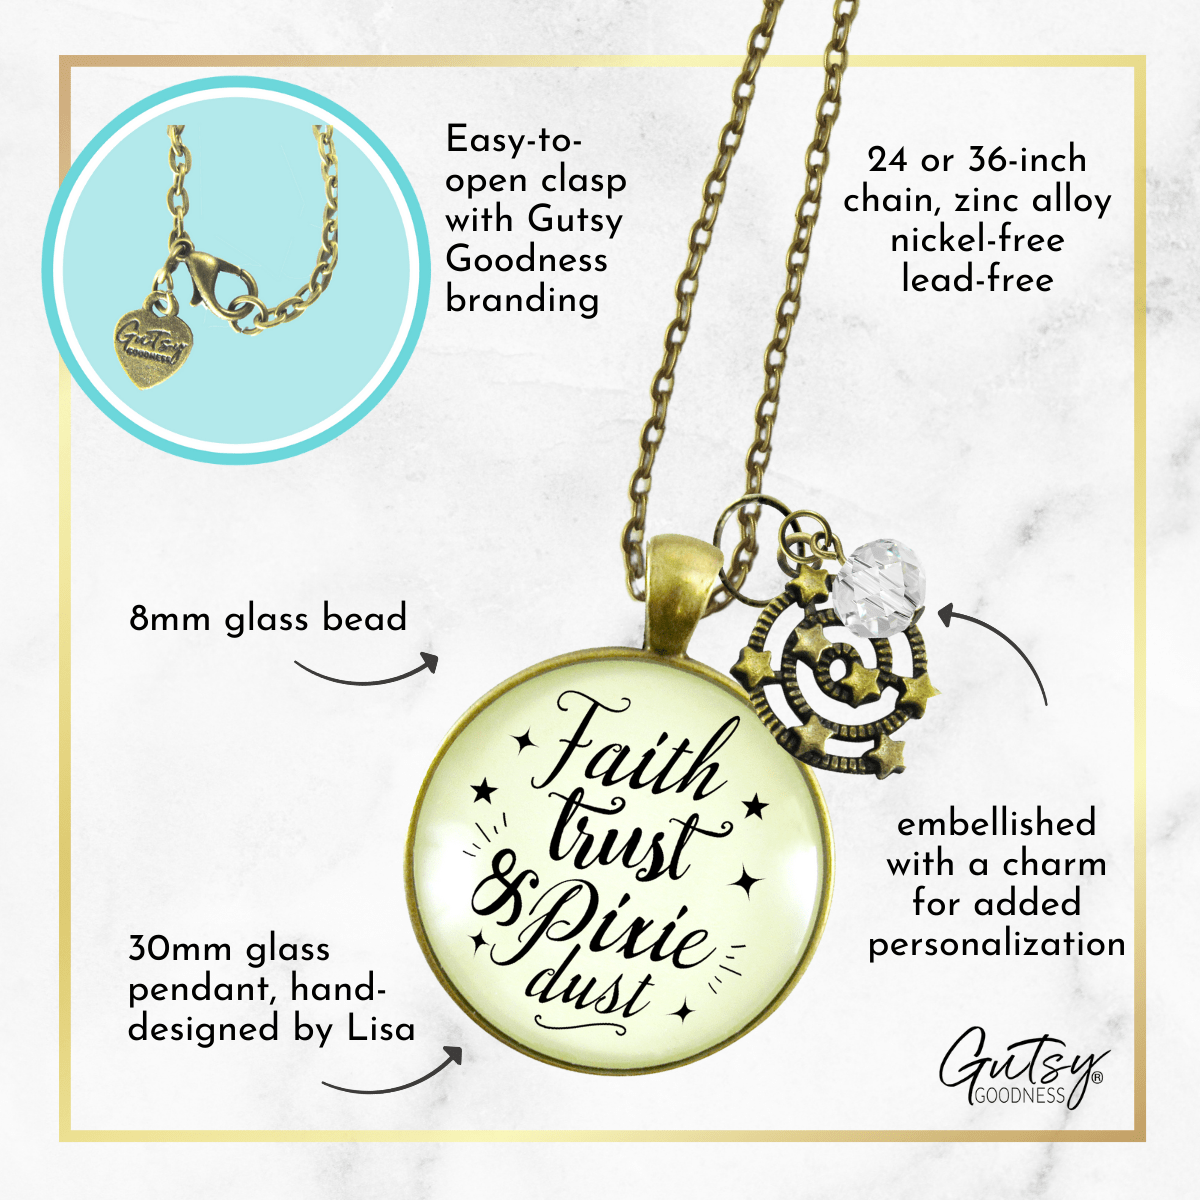 Gutsy Goodness Faith Trust Pixie Dust Fairy Tale Necklace Whimsical Fun Jewelry - Gutsy Goodness Handmade Jewelry;Faith Trust Pixie Dust Fairy Tale Necklace Whimsical Fun Jewelry - Gutsy Goodness Handmade Jewelry Gifts